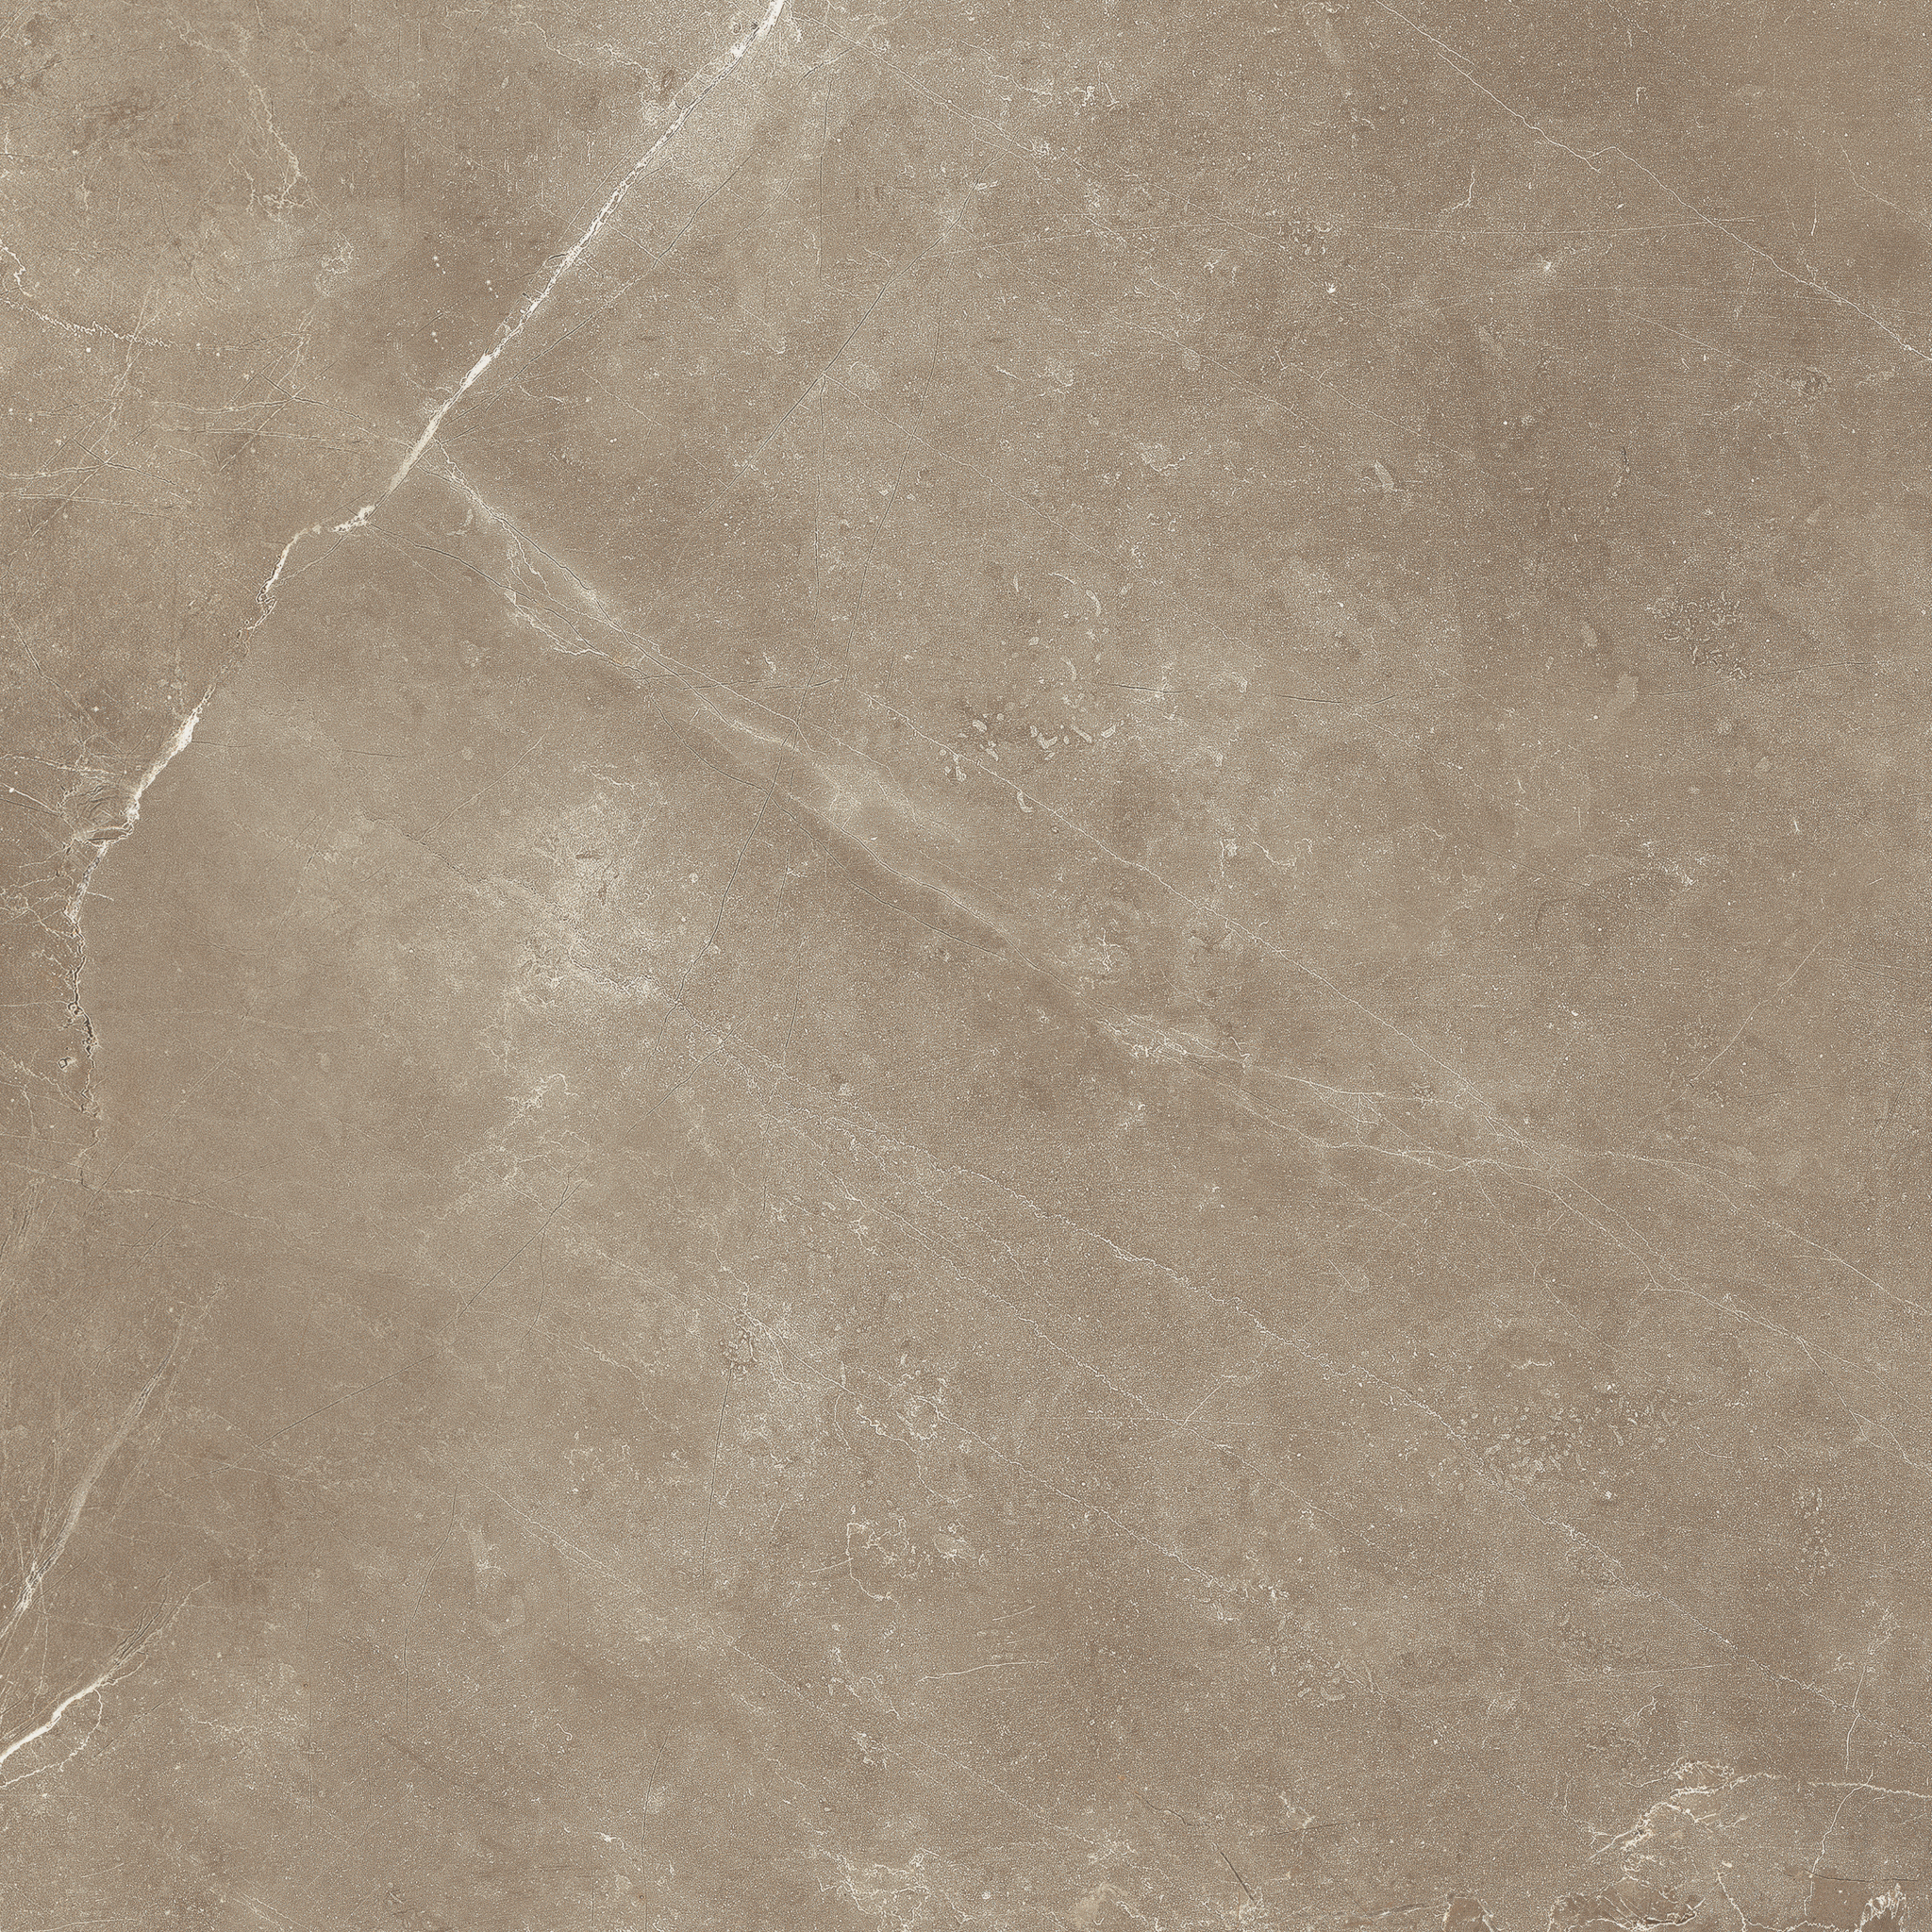 pulpis moca pattern glazed porcelain field tile from classic anatolia collection distributed by surface group international matte finish pressed edge 18x18 square shape